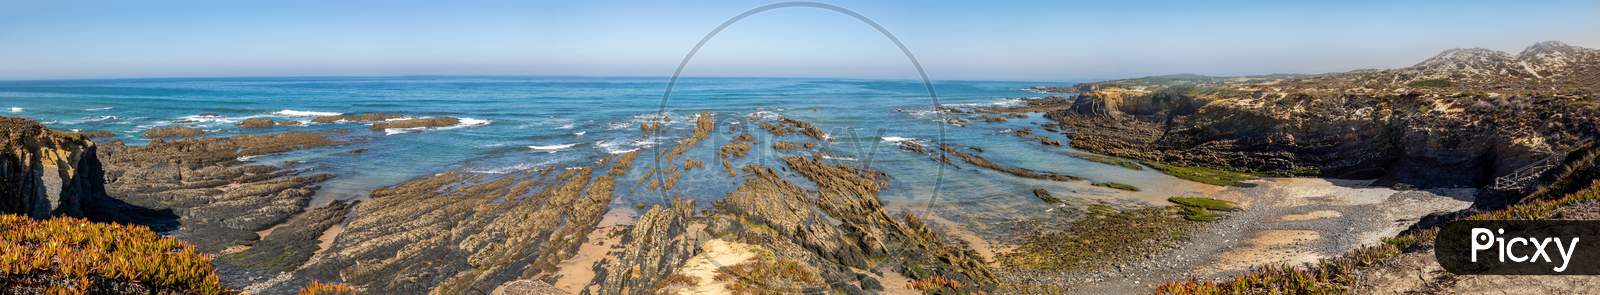 Wide panoramic view of beach in Costa Vicentina, Alentejo. Rocky beach, Atlantic ocean, cliff side with rocks. Amazing blue water and clear blue sky.